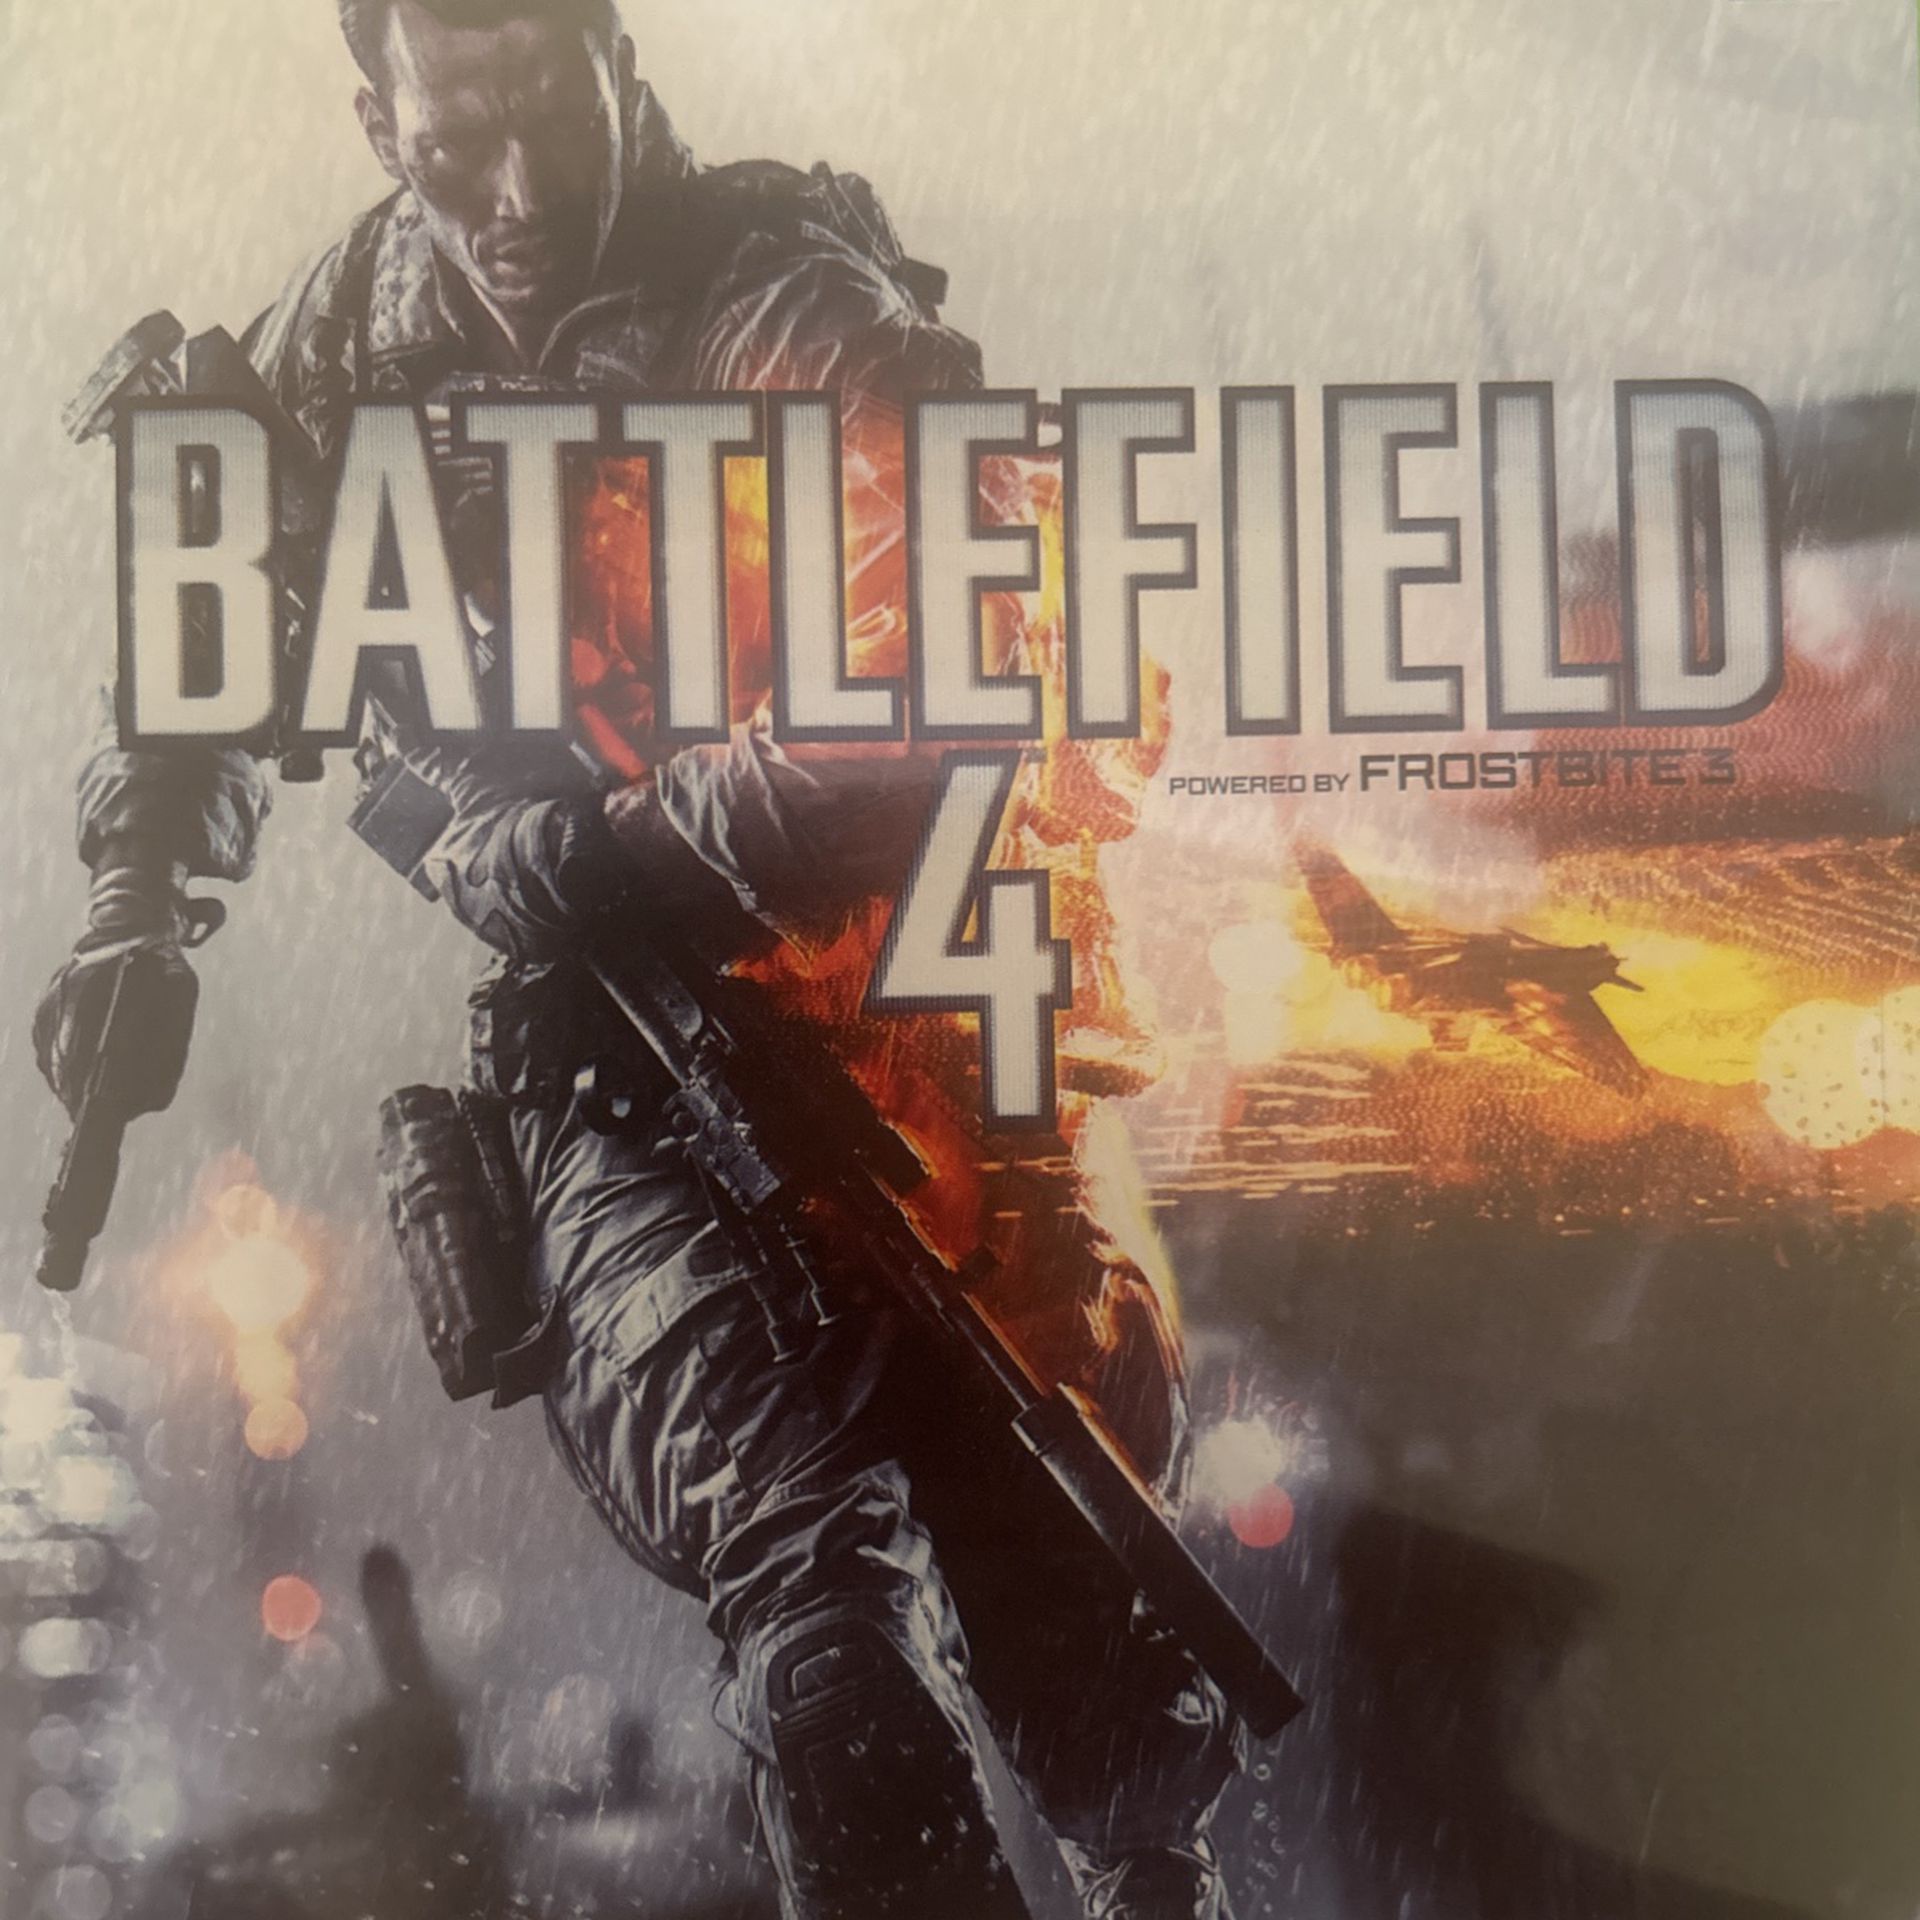 Battlefield 4 - Box And Booklet Included Inside .